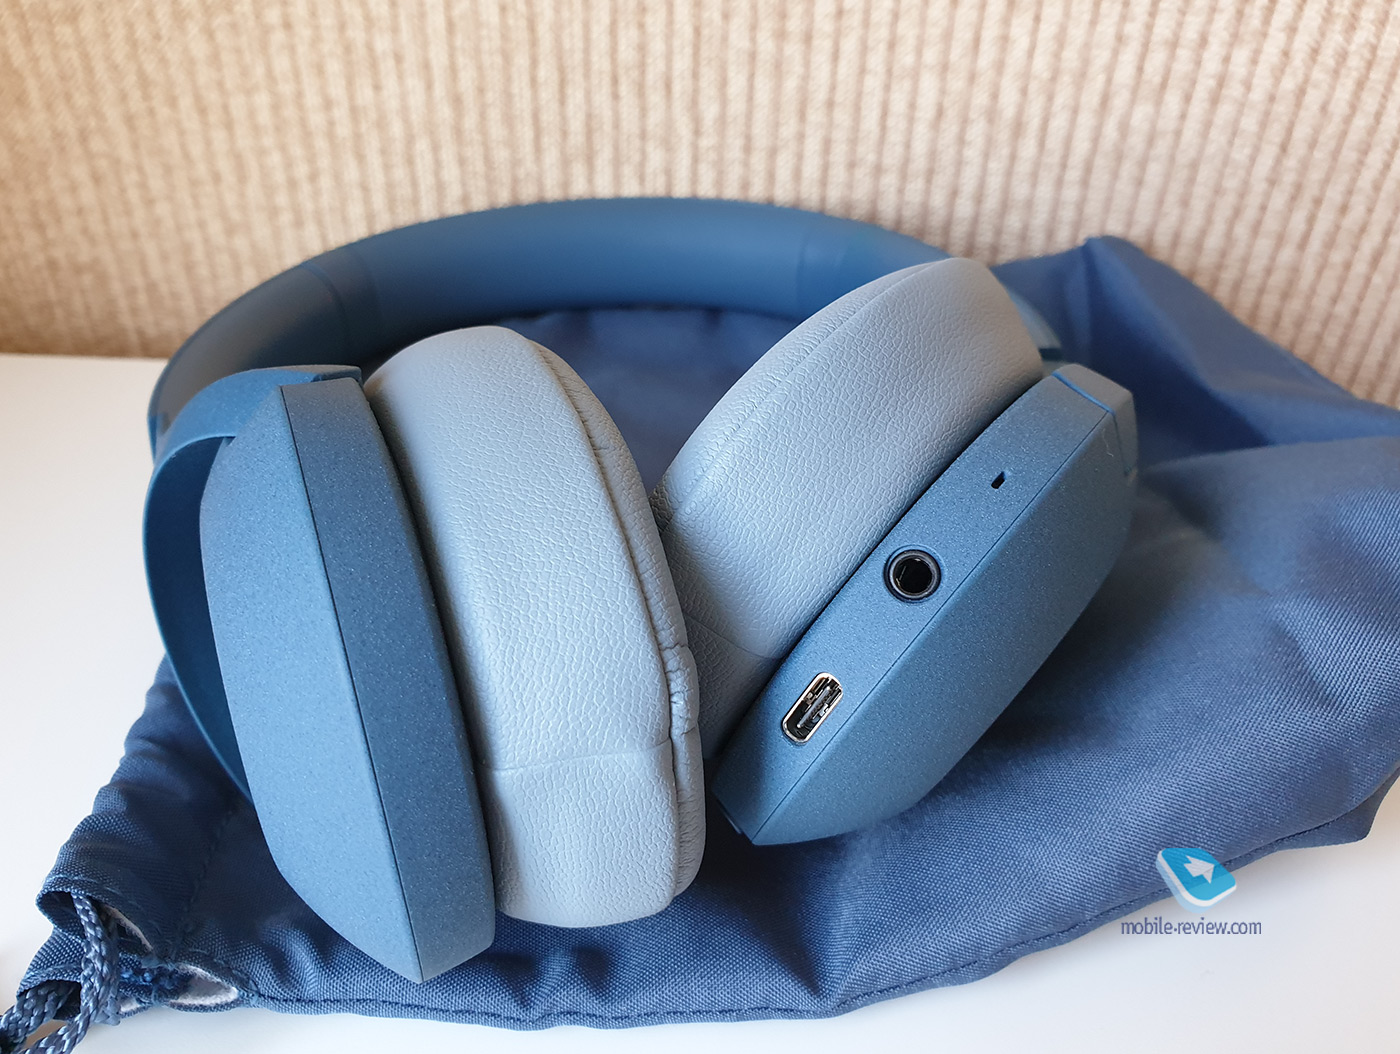 Sony WH-H910N h.ear on 3 headphones: when beauty requires sacrifice